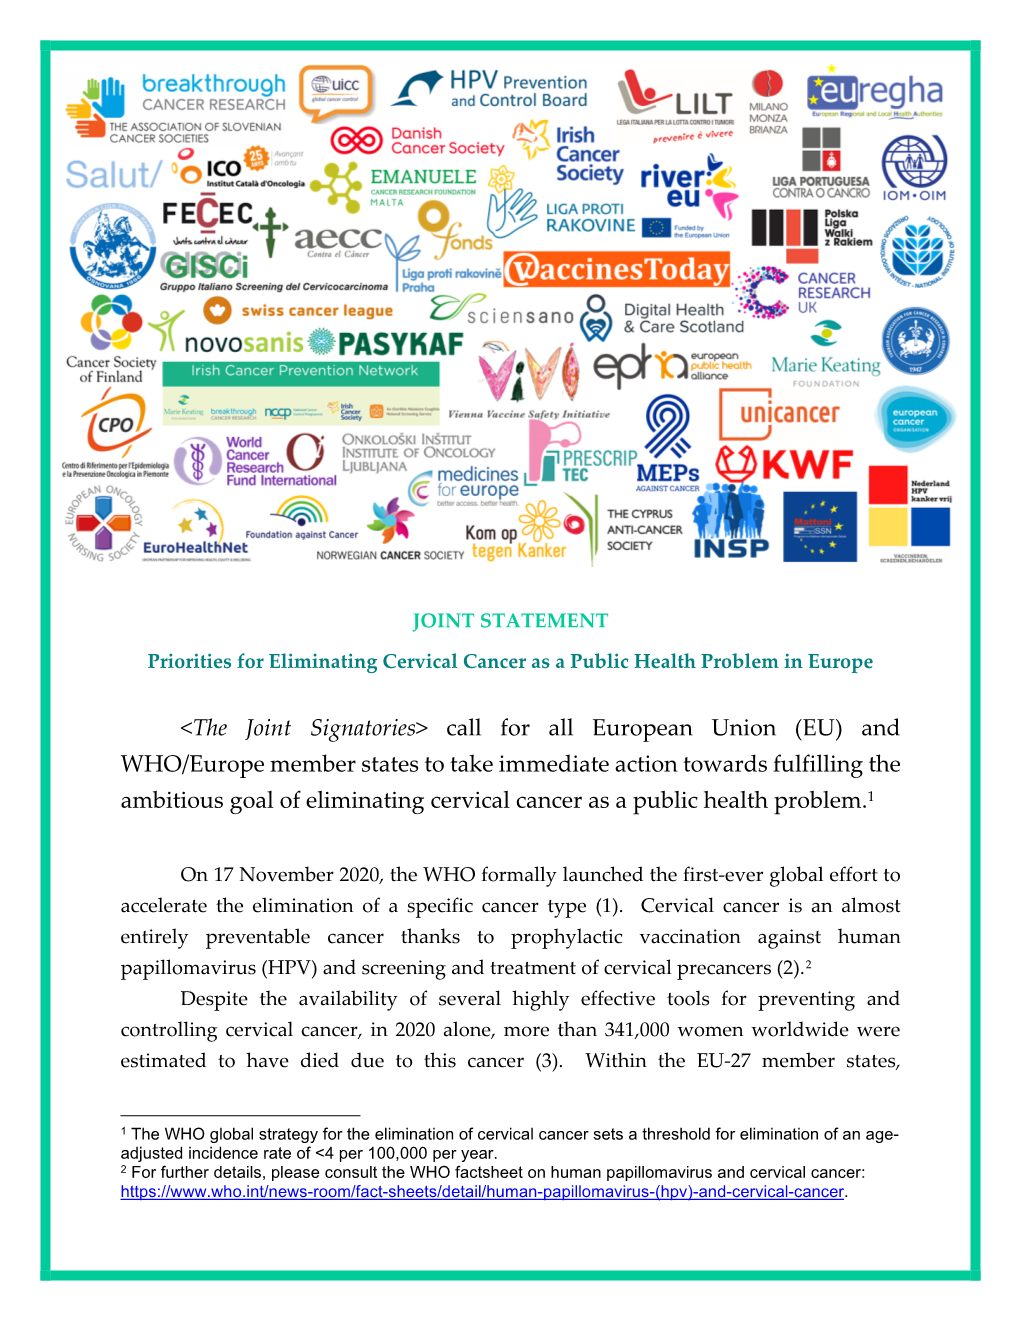 (EU) and WHO/Europe Member States to Take Immediate Action Towards Fulfilling the Ambitious Goal of Eliminating Cervical Cancer As a Public Health Problem.1